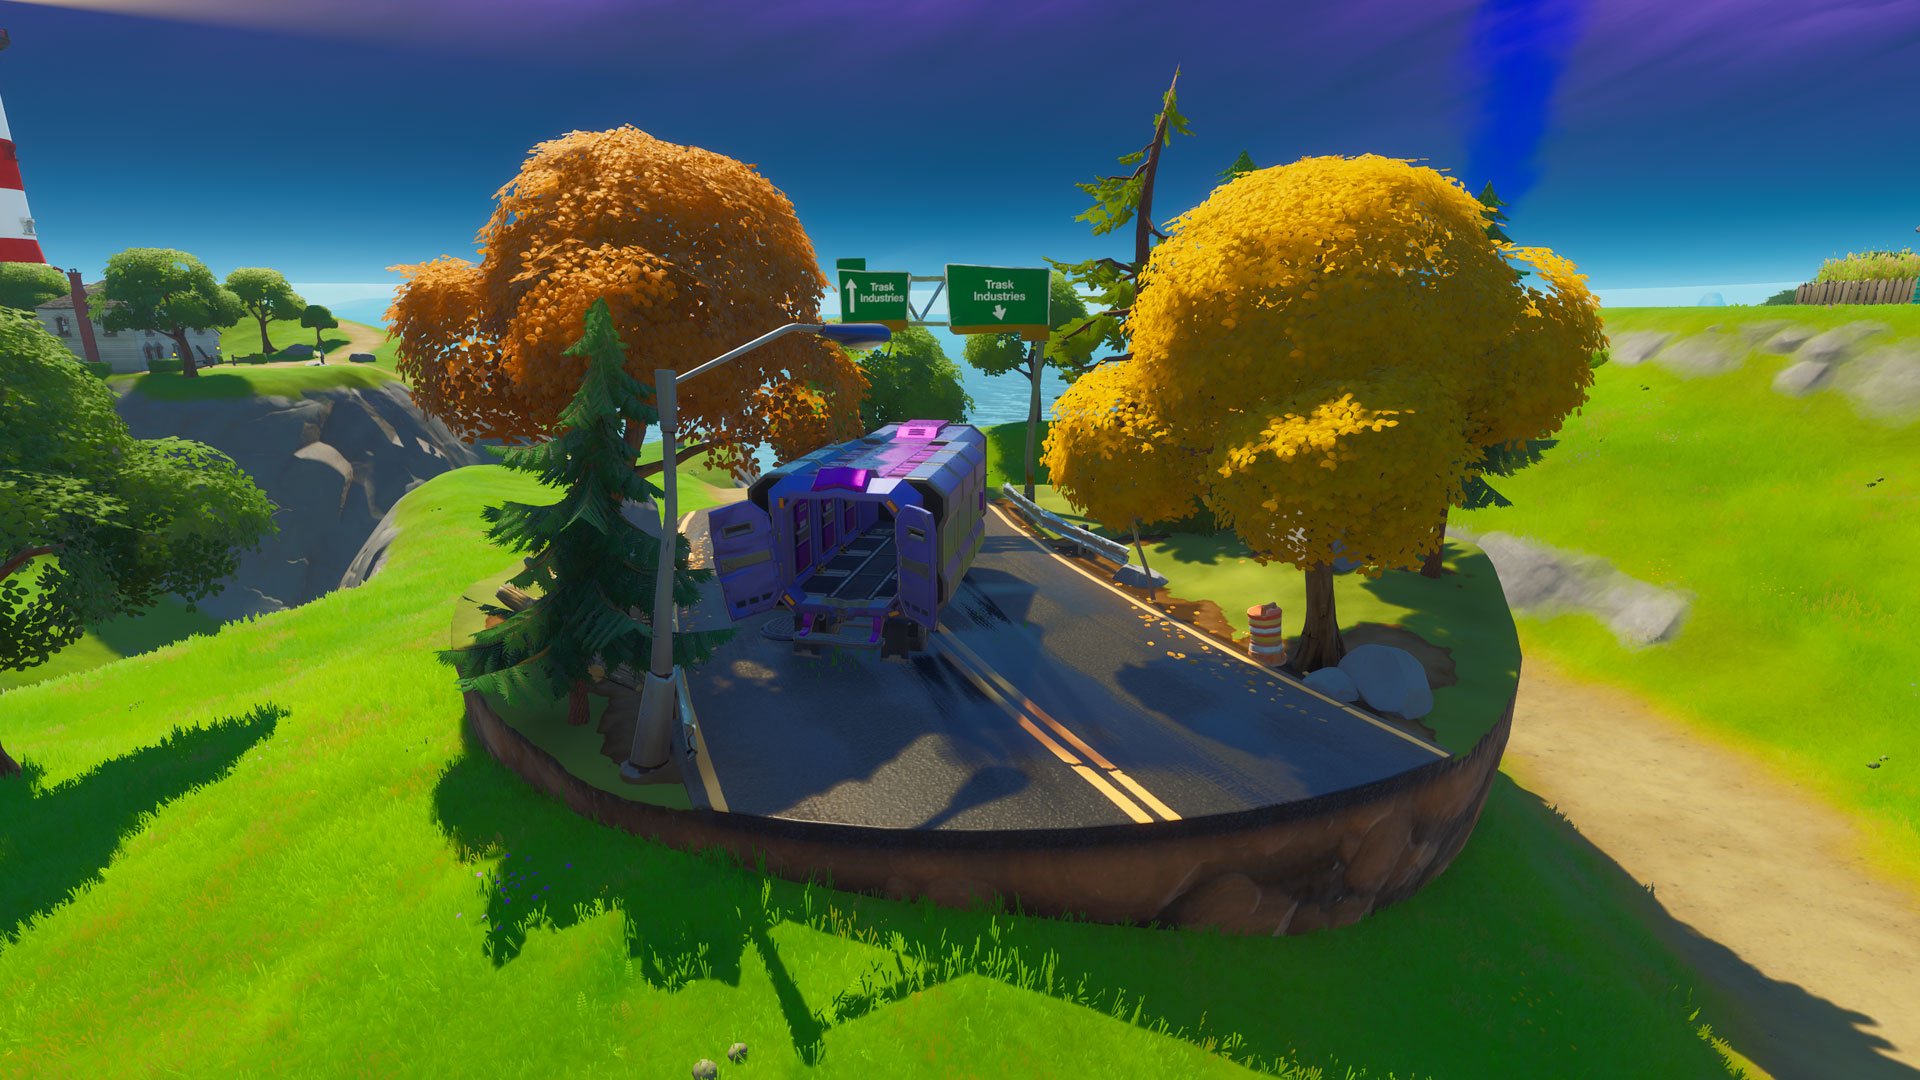 Trask Transport Truck Location in Fortnite - Pro Game Guides